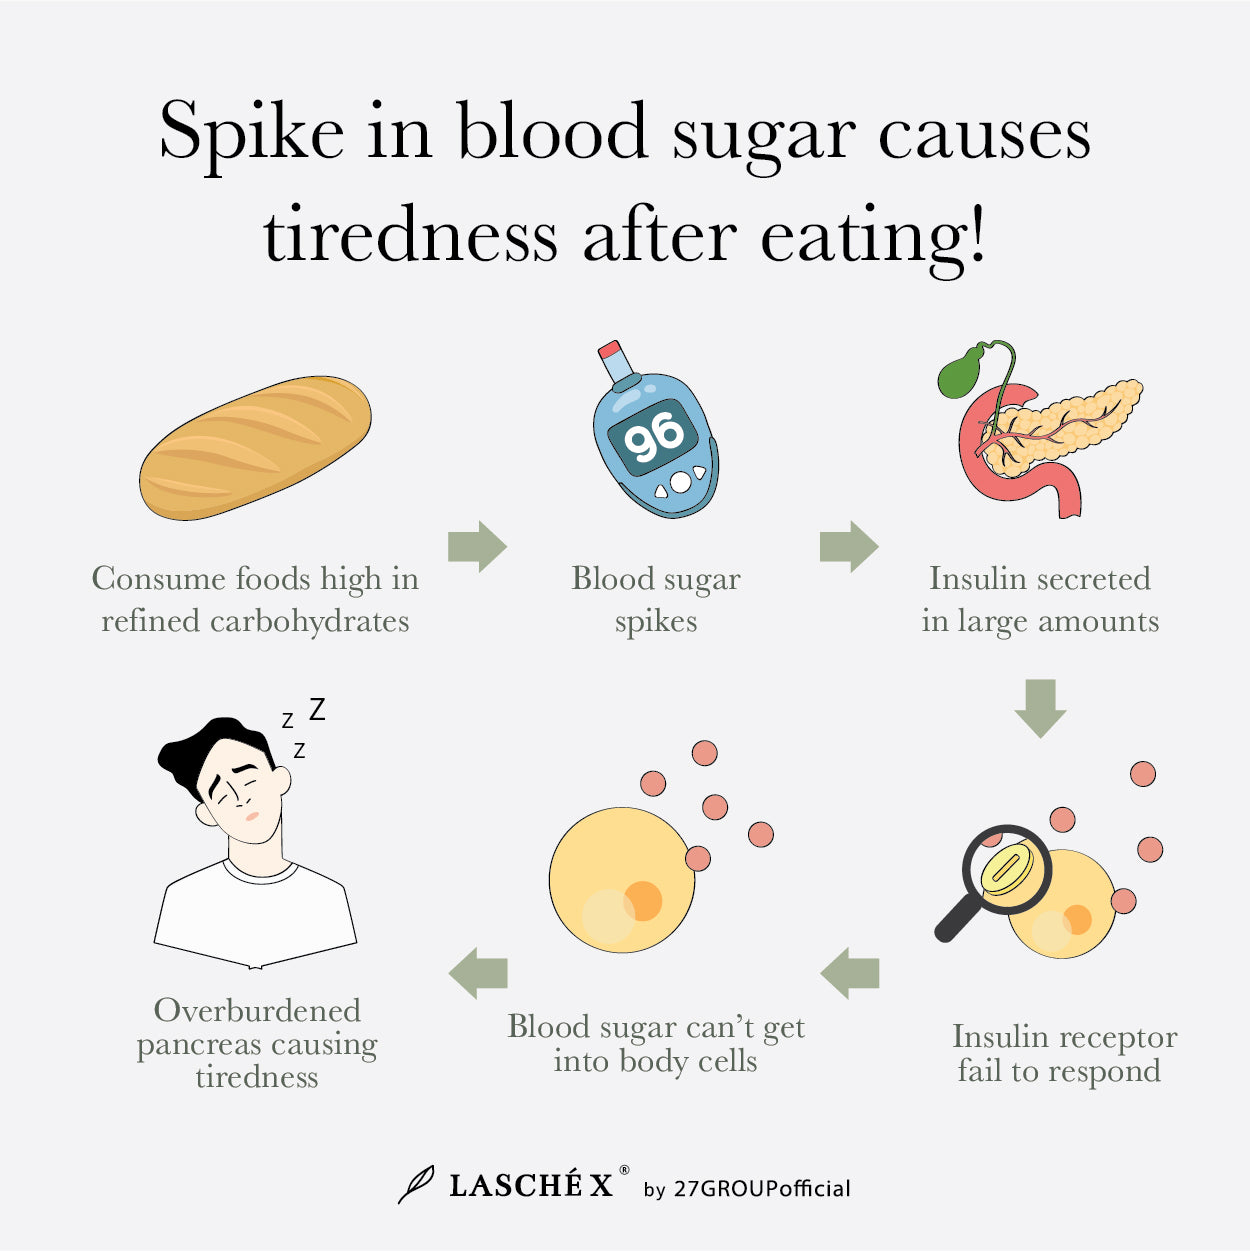 The process of spike in blood sugar and how it causes tiredness after eating